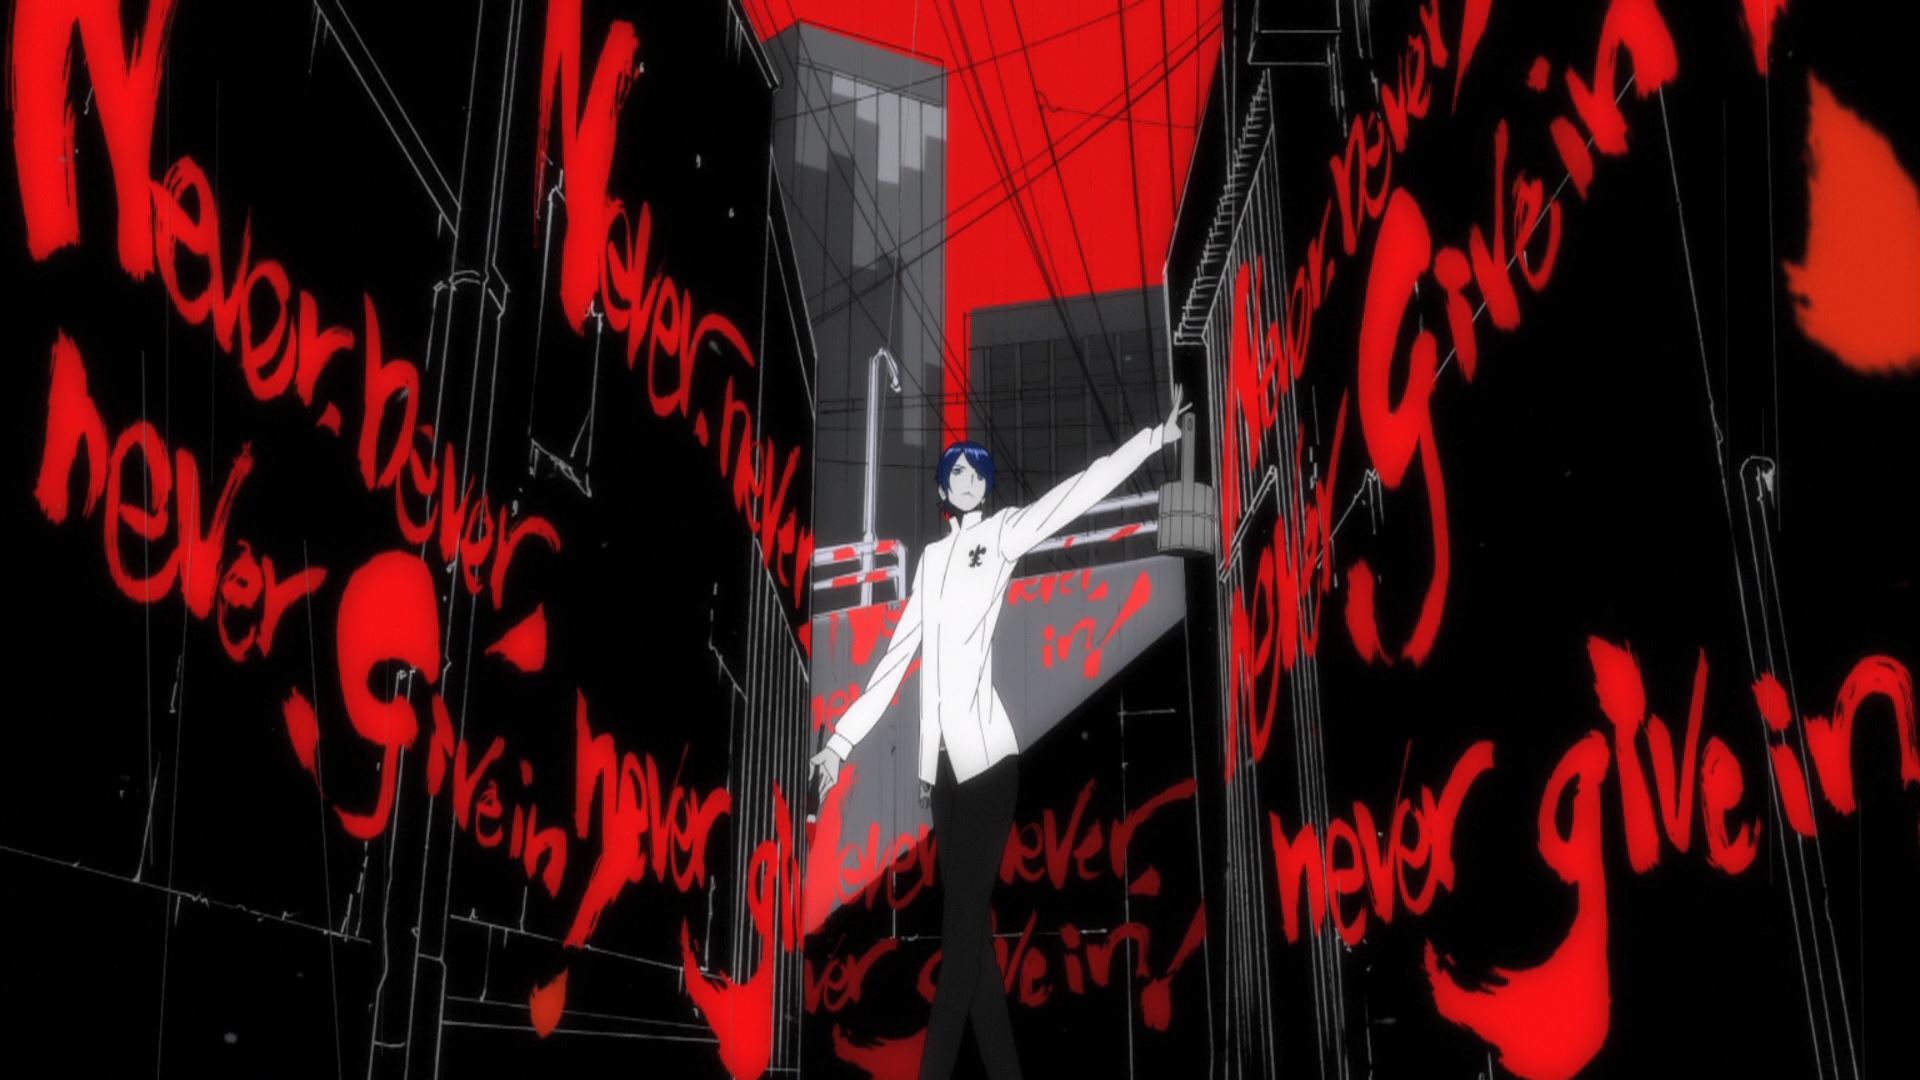 Here’s the Second Trailer for Persona 5